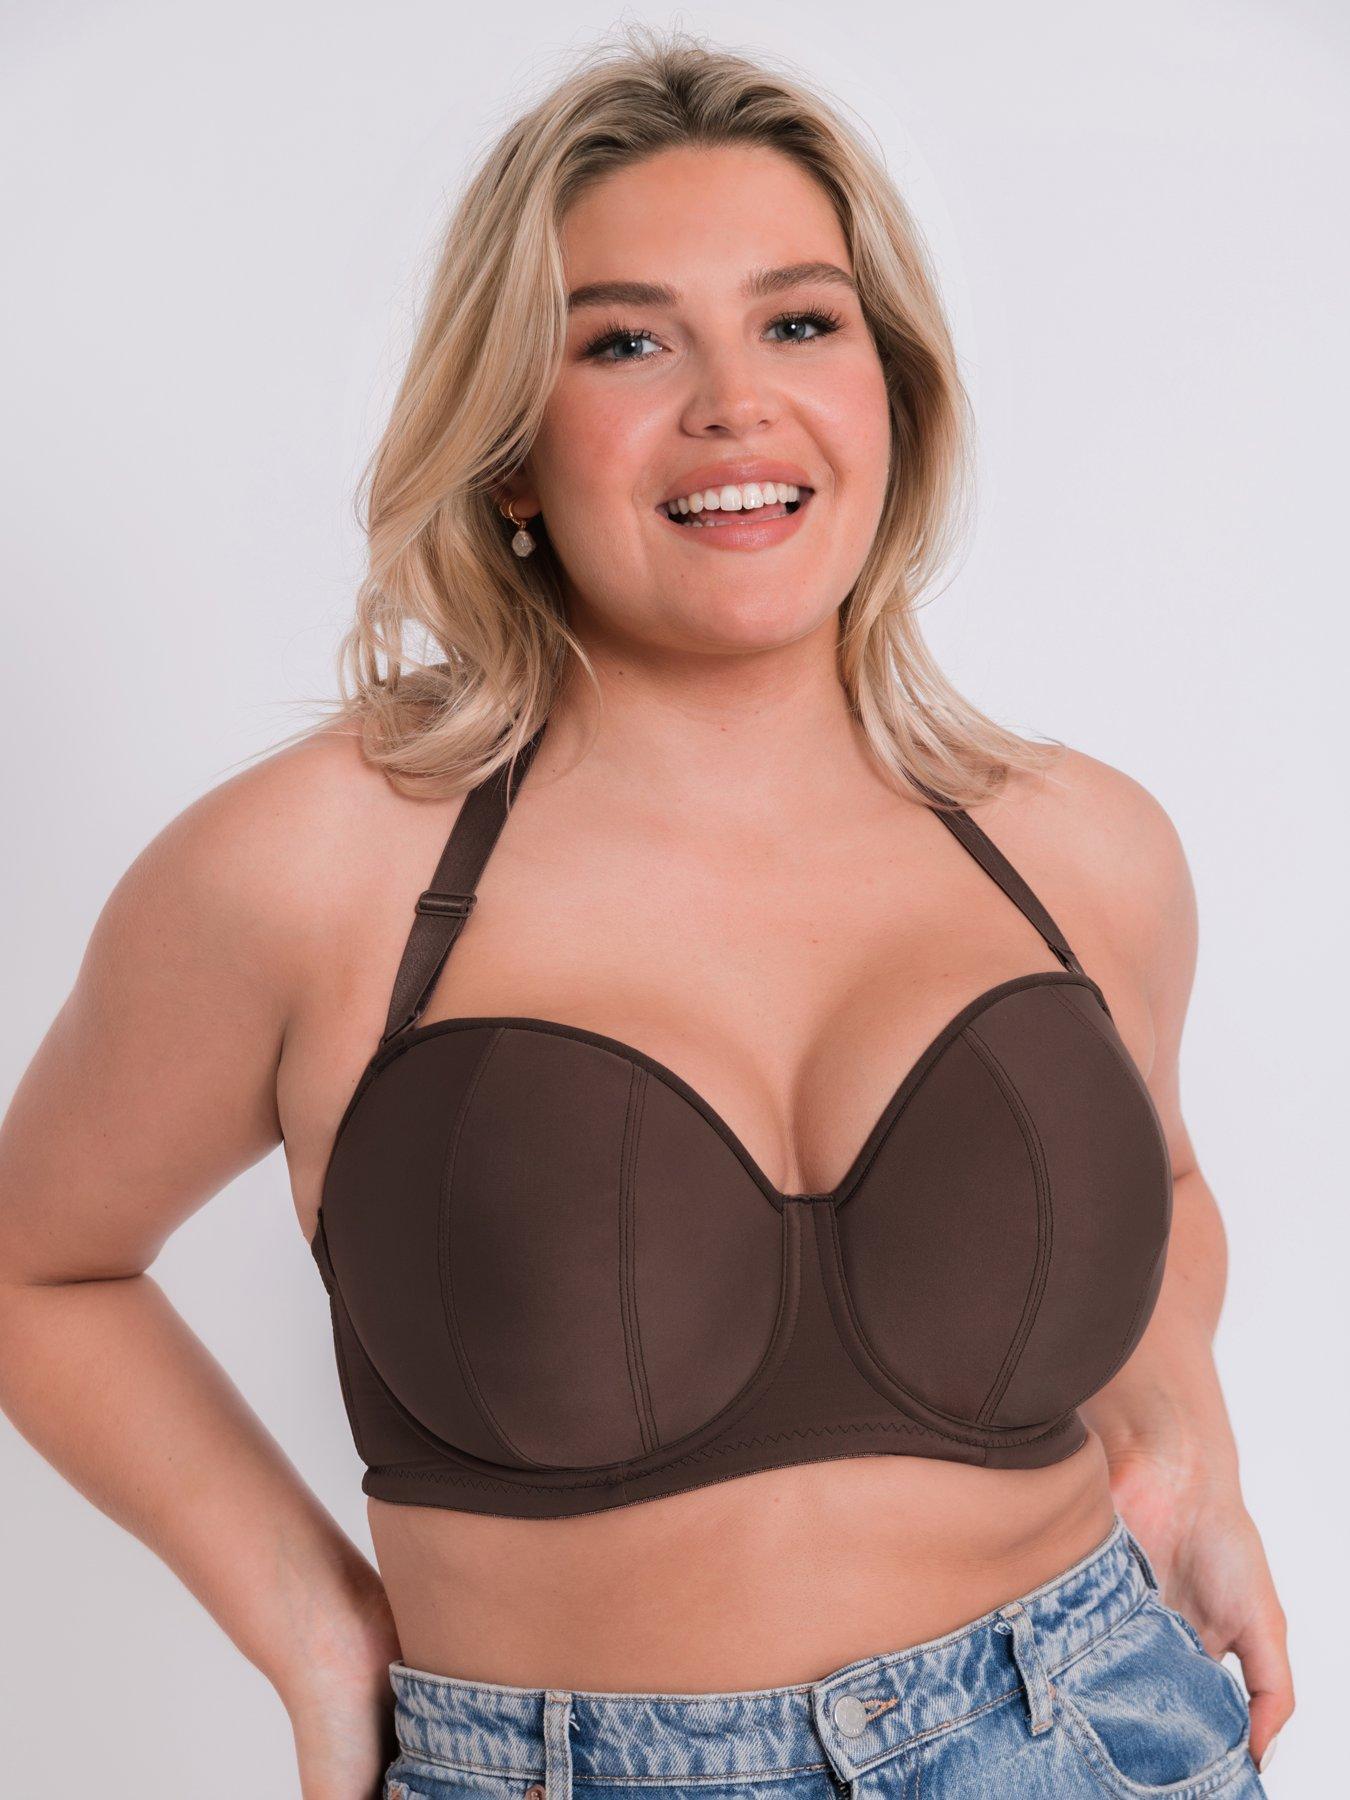 Curvy Kate Luxe Strapless Bra Pearl Ivory